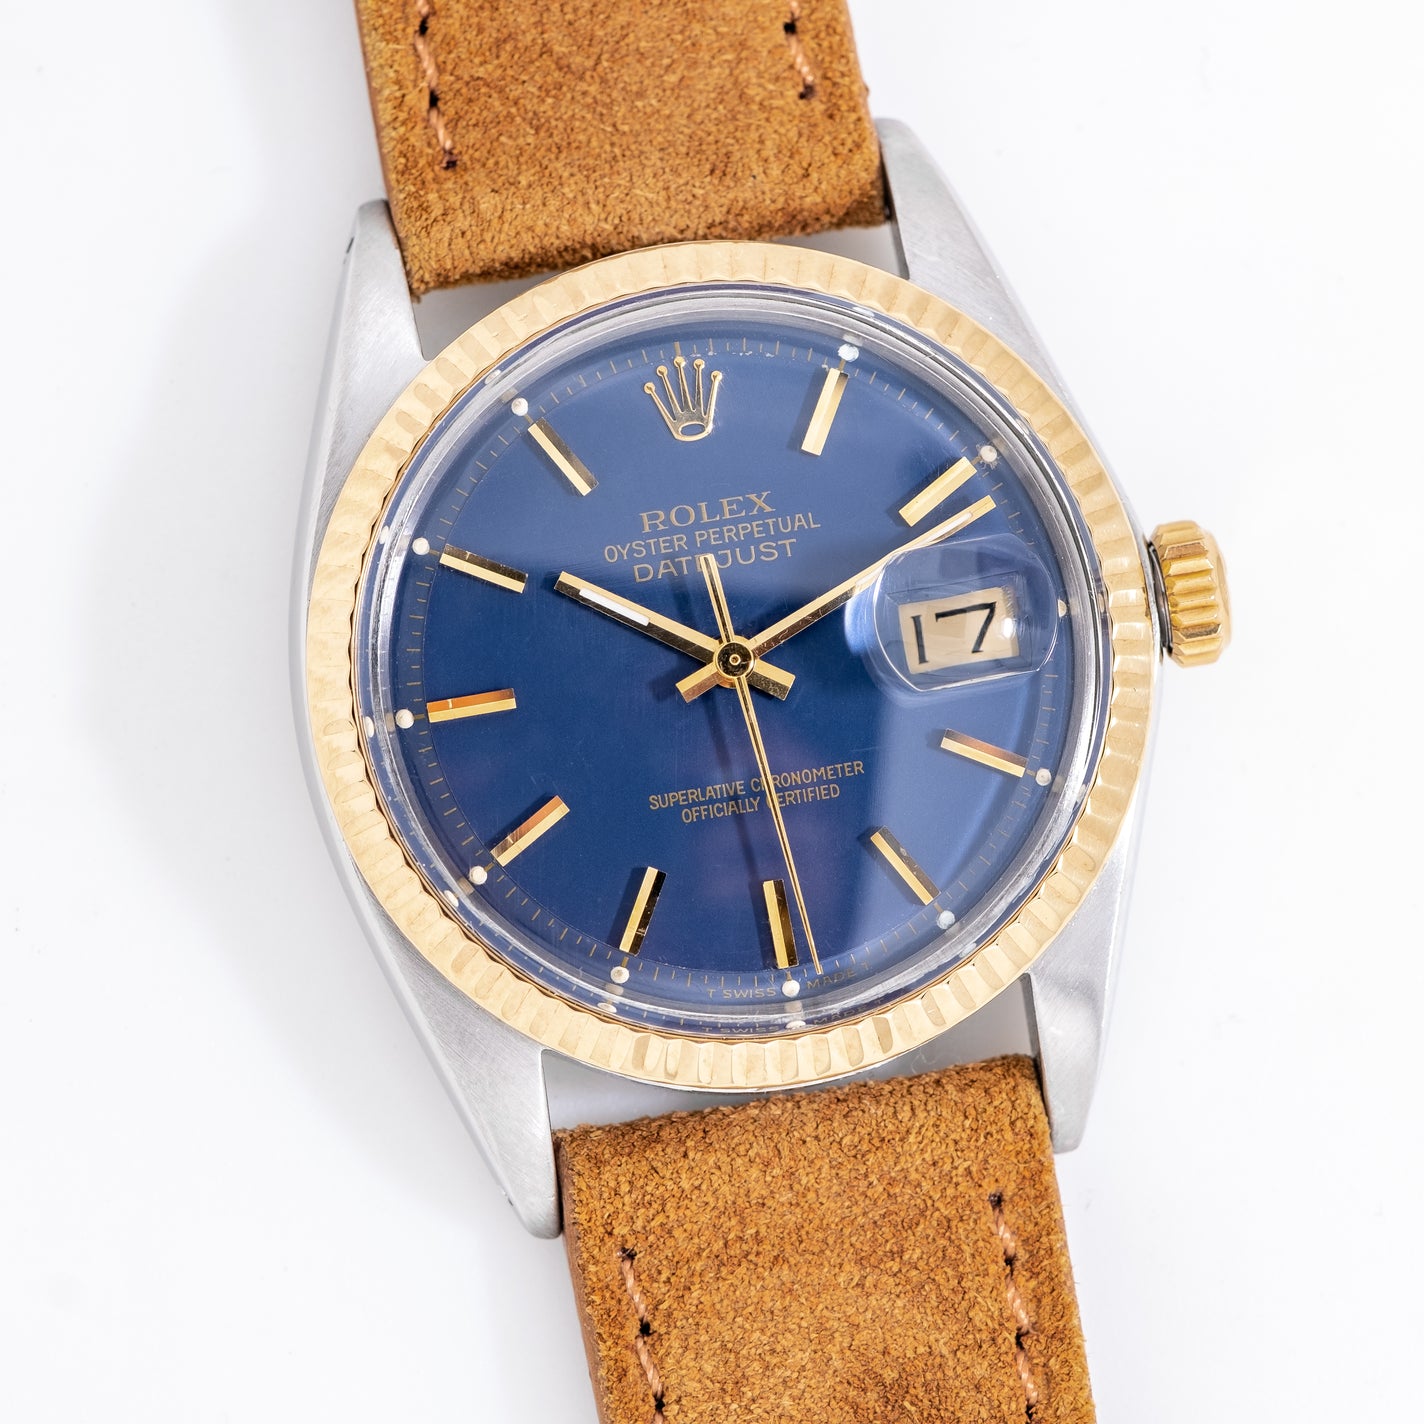 Resonate Ud over stavelse 1968 Vintage Rolex Datejust Reference 1601 Two Tone in 18K Yellow Gold –  Second Time Around Watch Company